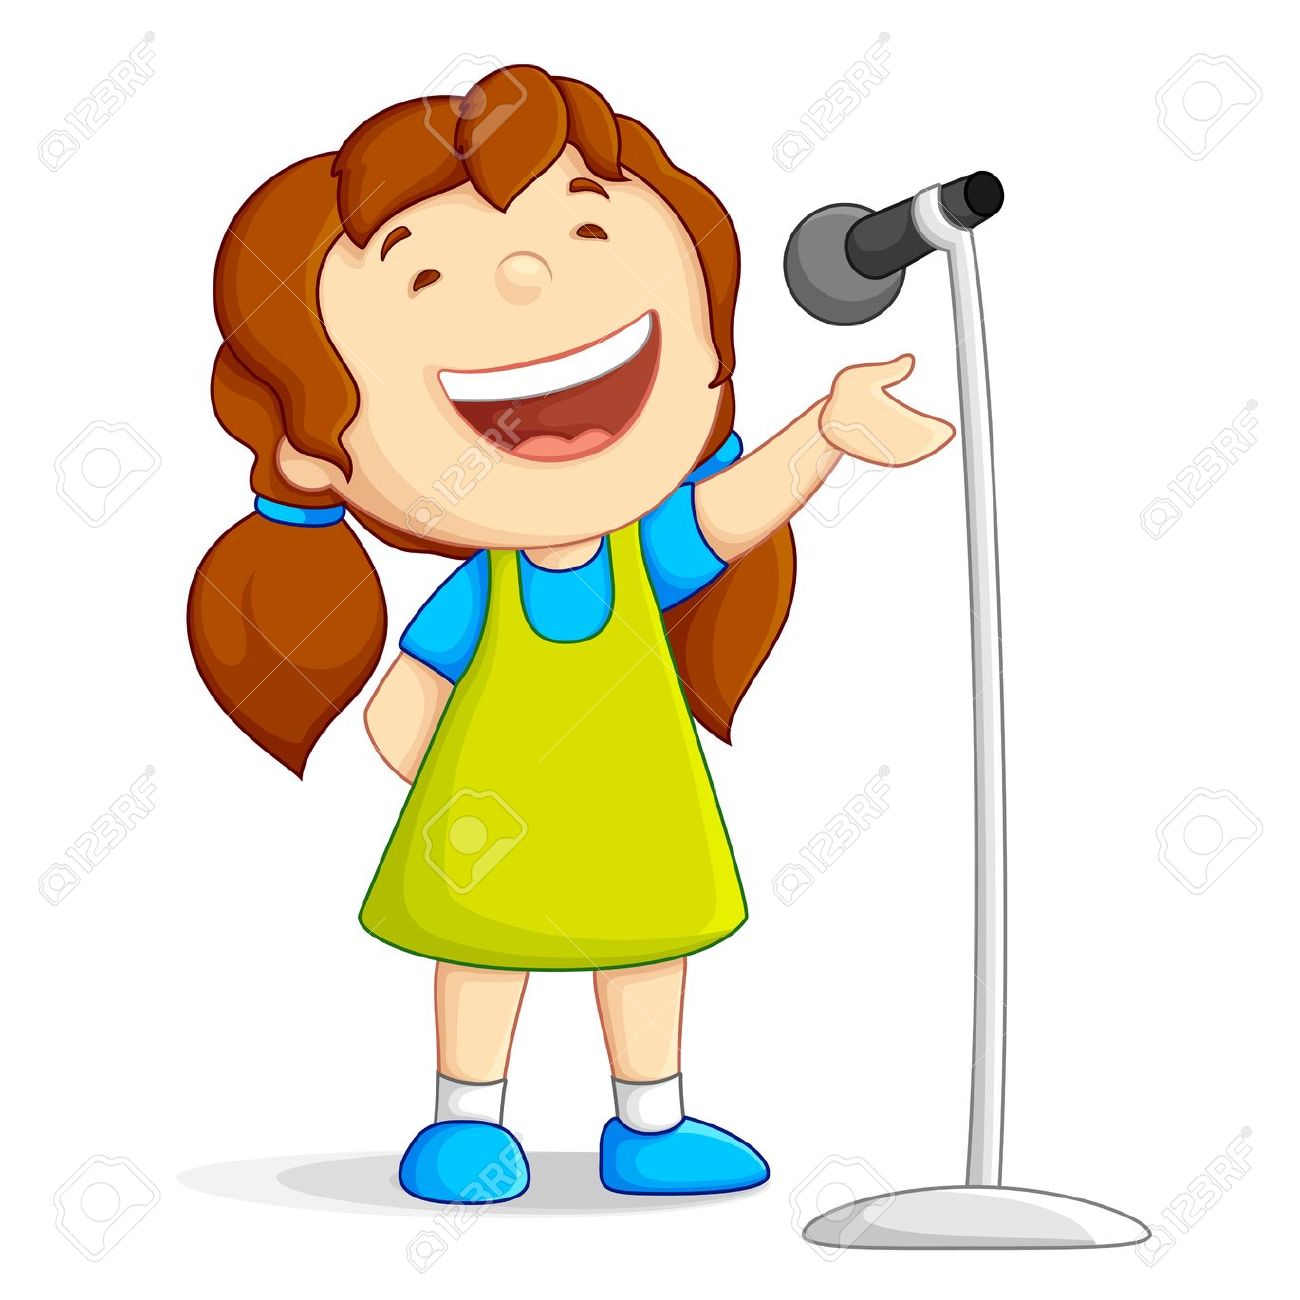 Sing Clipart & Sing Clip Art Images.